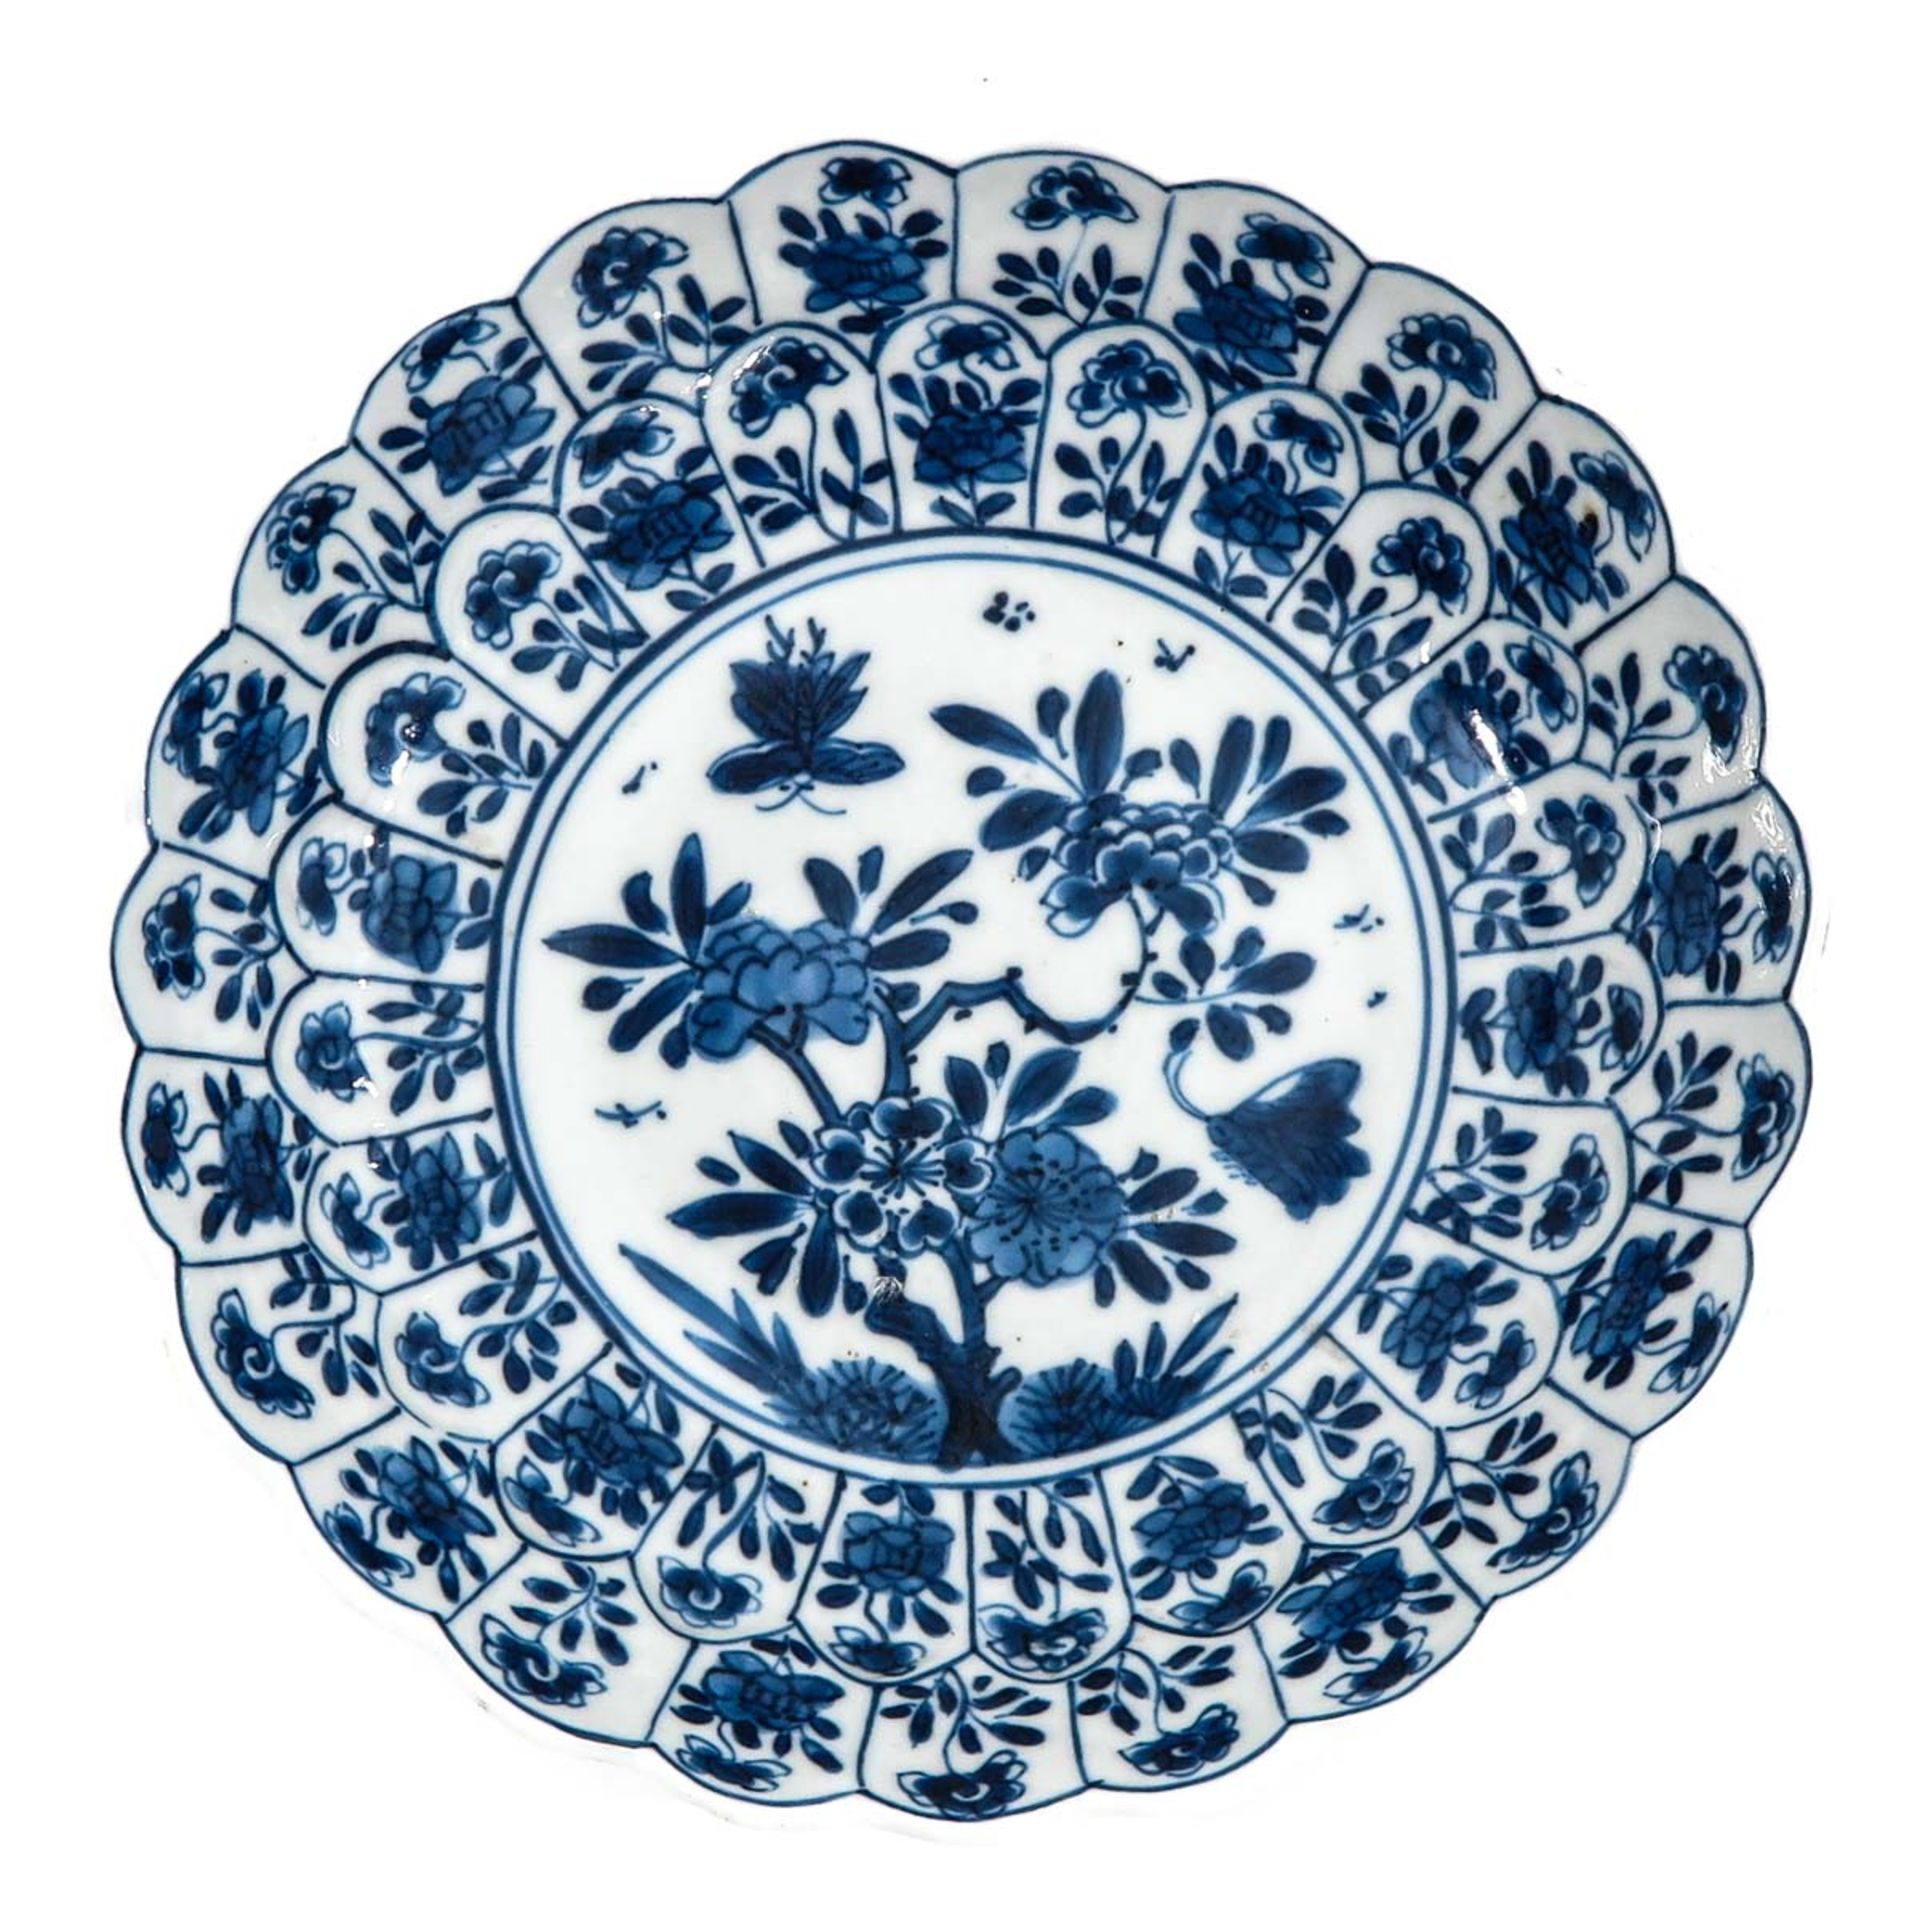 A Series of 3 Blue and White Plates - Image 5 of 10